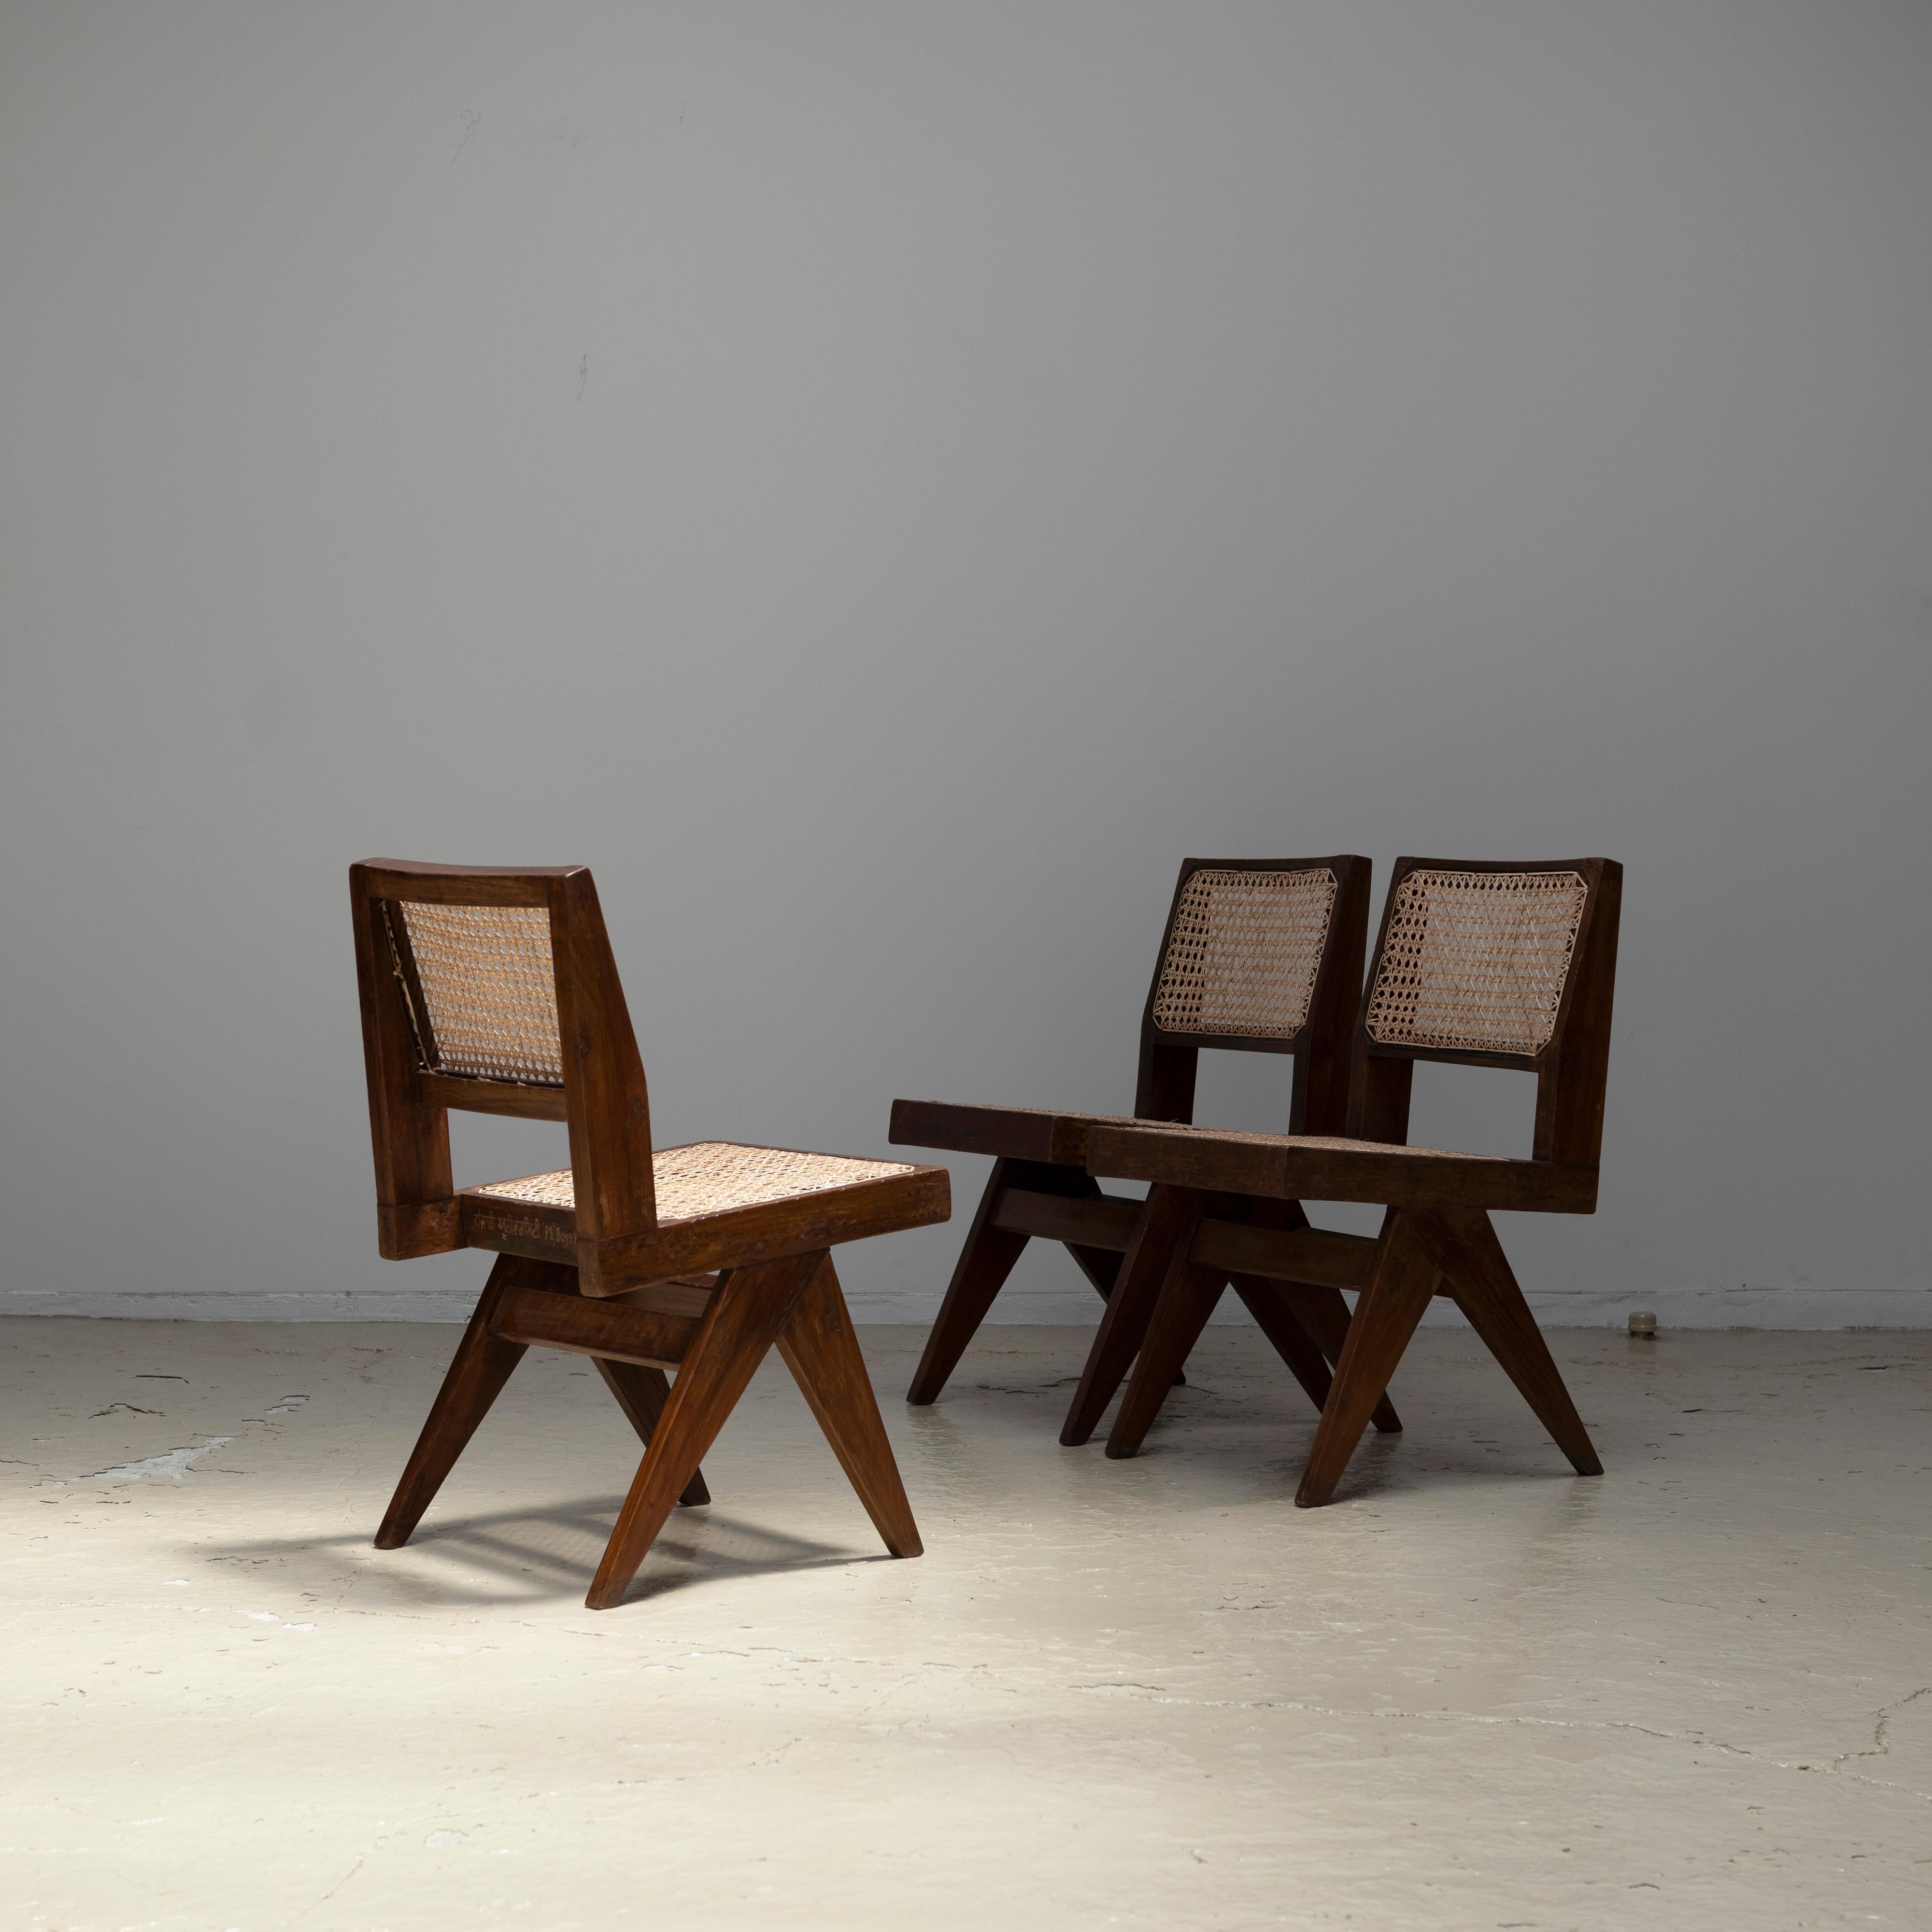 Indian Pierre Jeanneret Armless Dining Chairs, Chandigarh